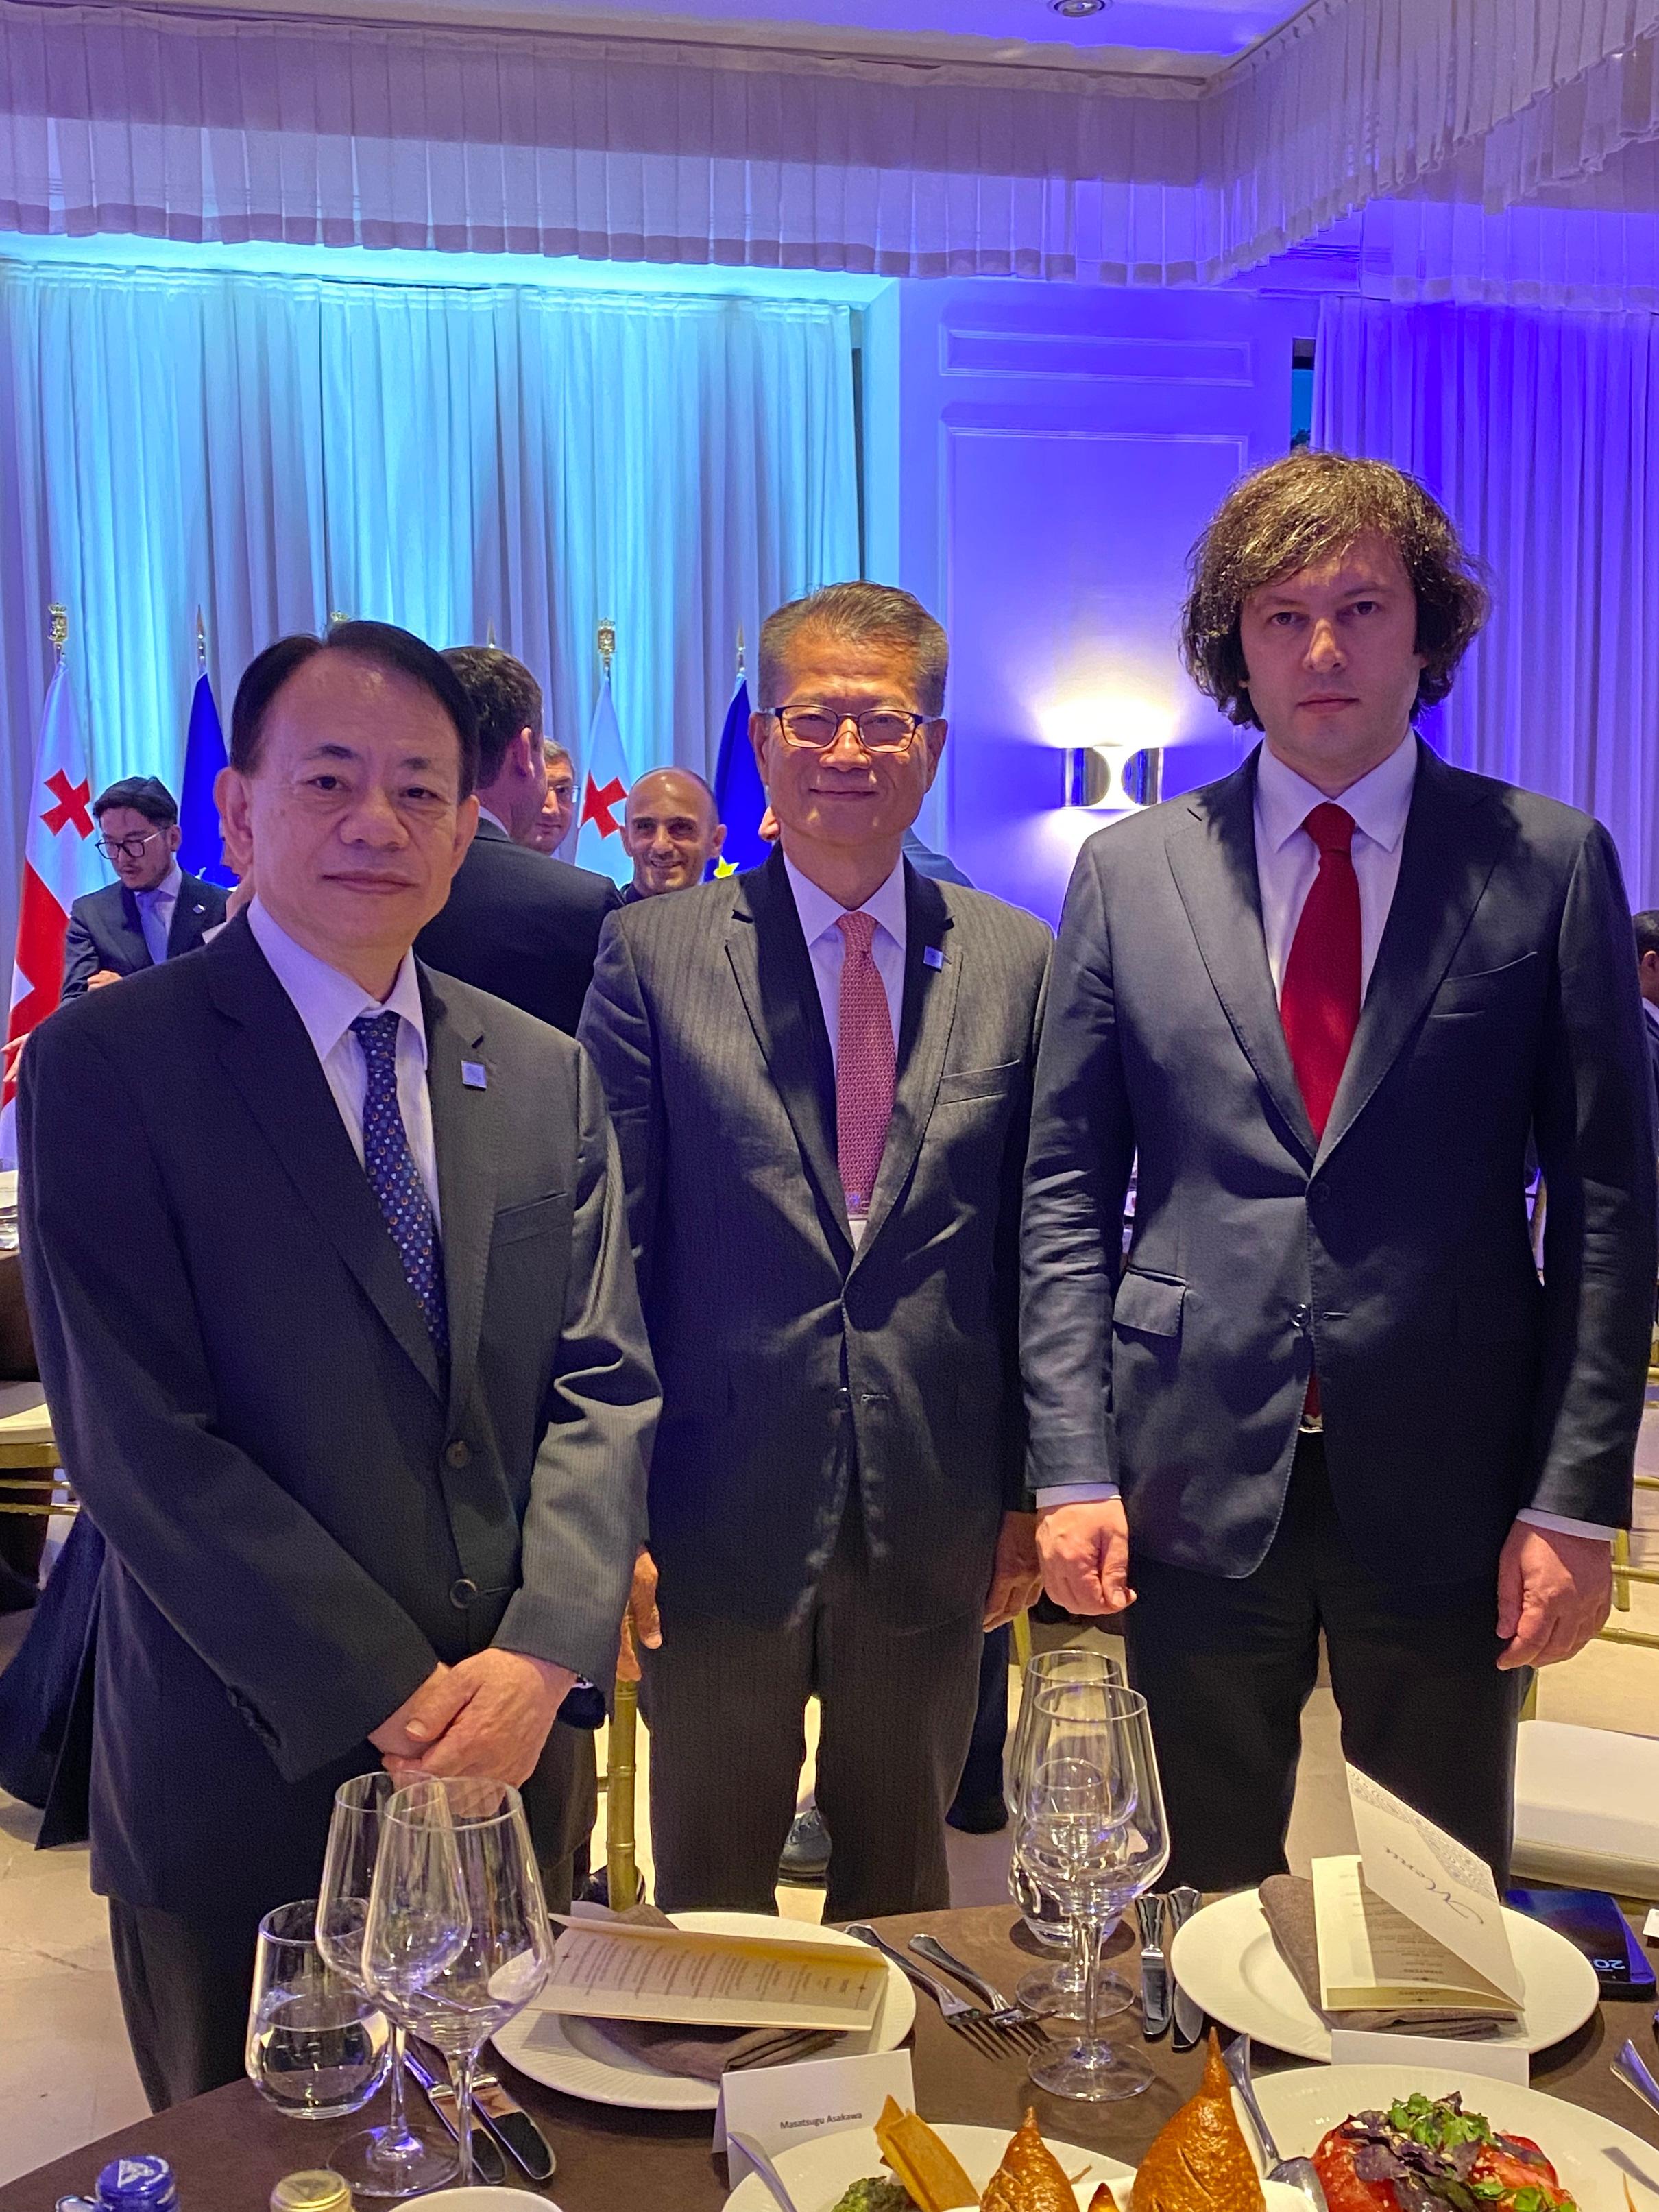 The Financial Secretary, Mr Paul Chan, continued his attendance yesterday (May 4, Tbilisi time) at the 57th Annual Meeting of the Board of Governors of the Asian Development Bank (ADB) in Tbilisi, Georgia. Photo shows Mr Chan (centre) attending the dinner hosted for the Board of Governors with the Prime Minister of Georgia, Mr Irakli Kobakhidze (right), and the President of the ADB, Mr Masatsugu Asakawa (left).
